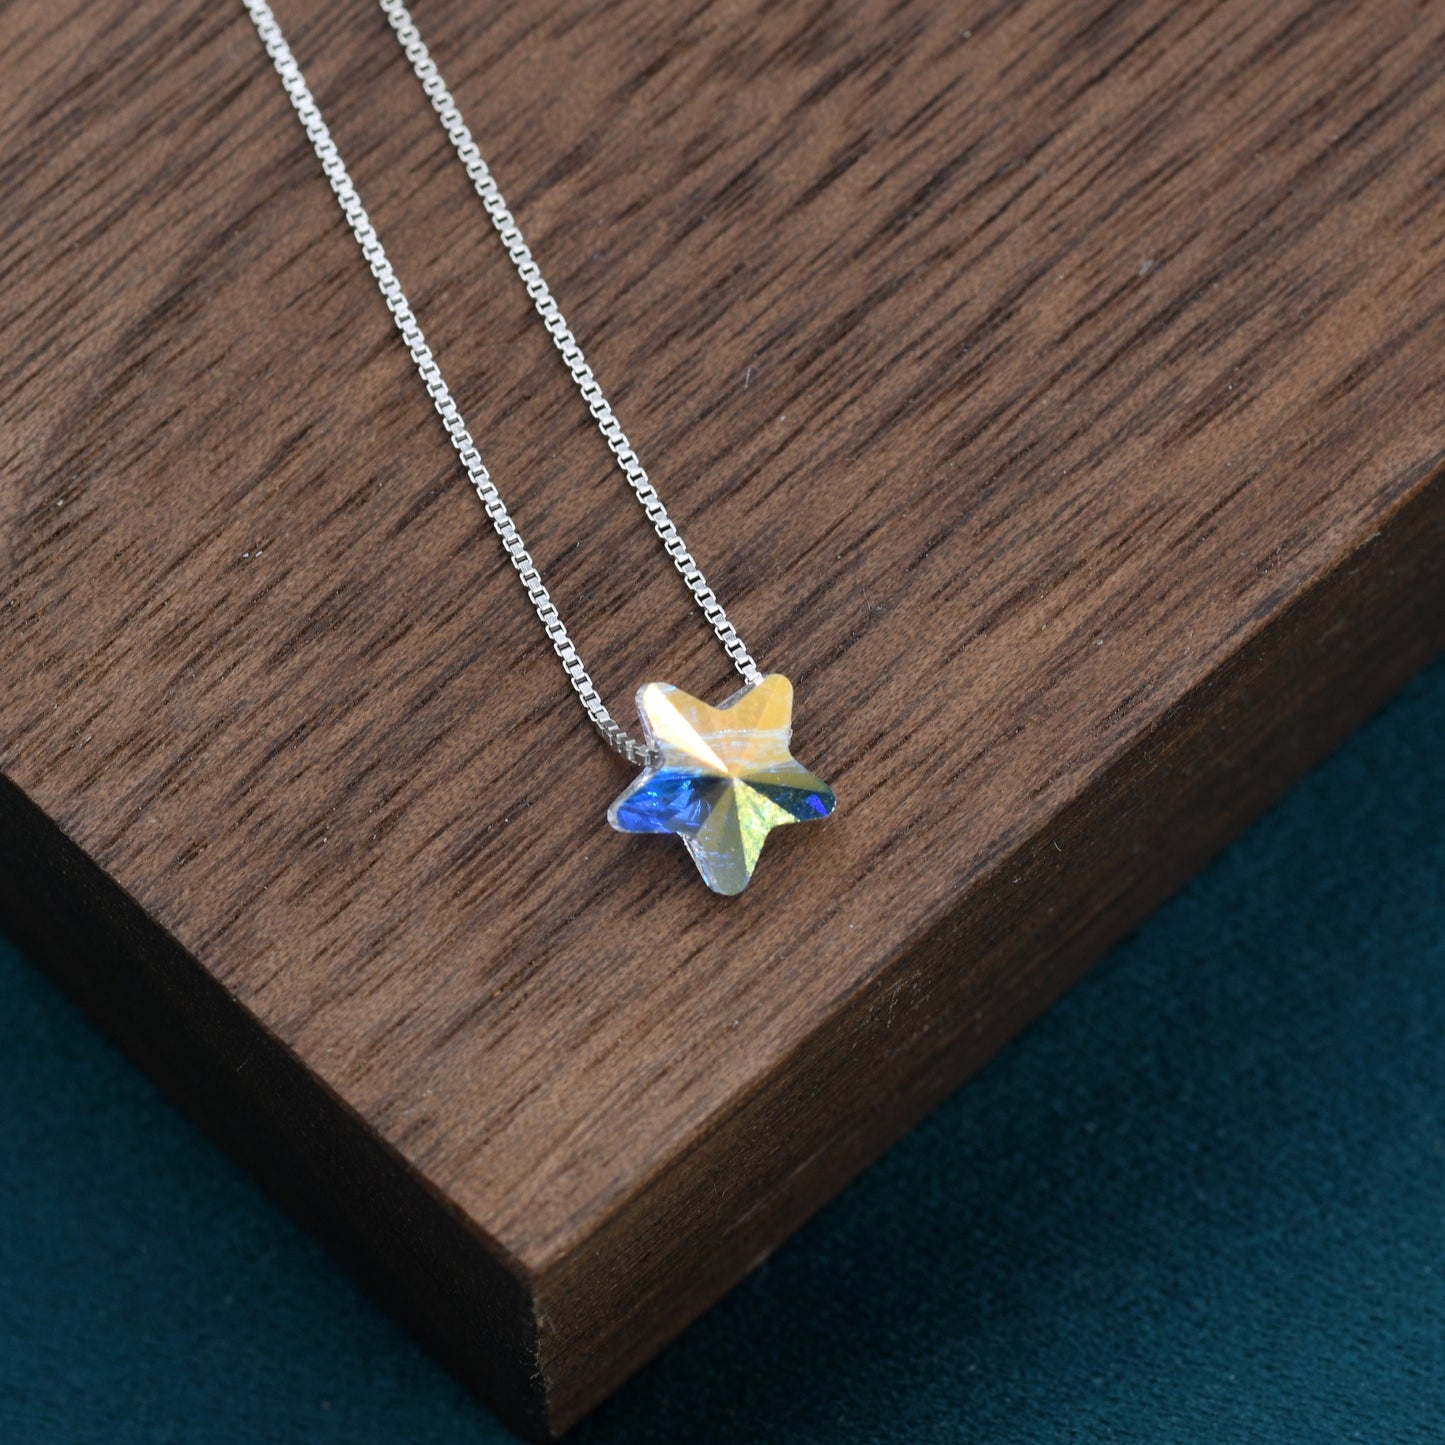 AB Crystal Star Pendant Necklace in Sterling Silver,  Colour Changing Aurora Crystal Necklace, Aurora Crystal, AB Crystal